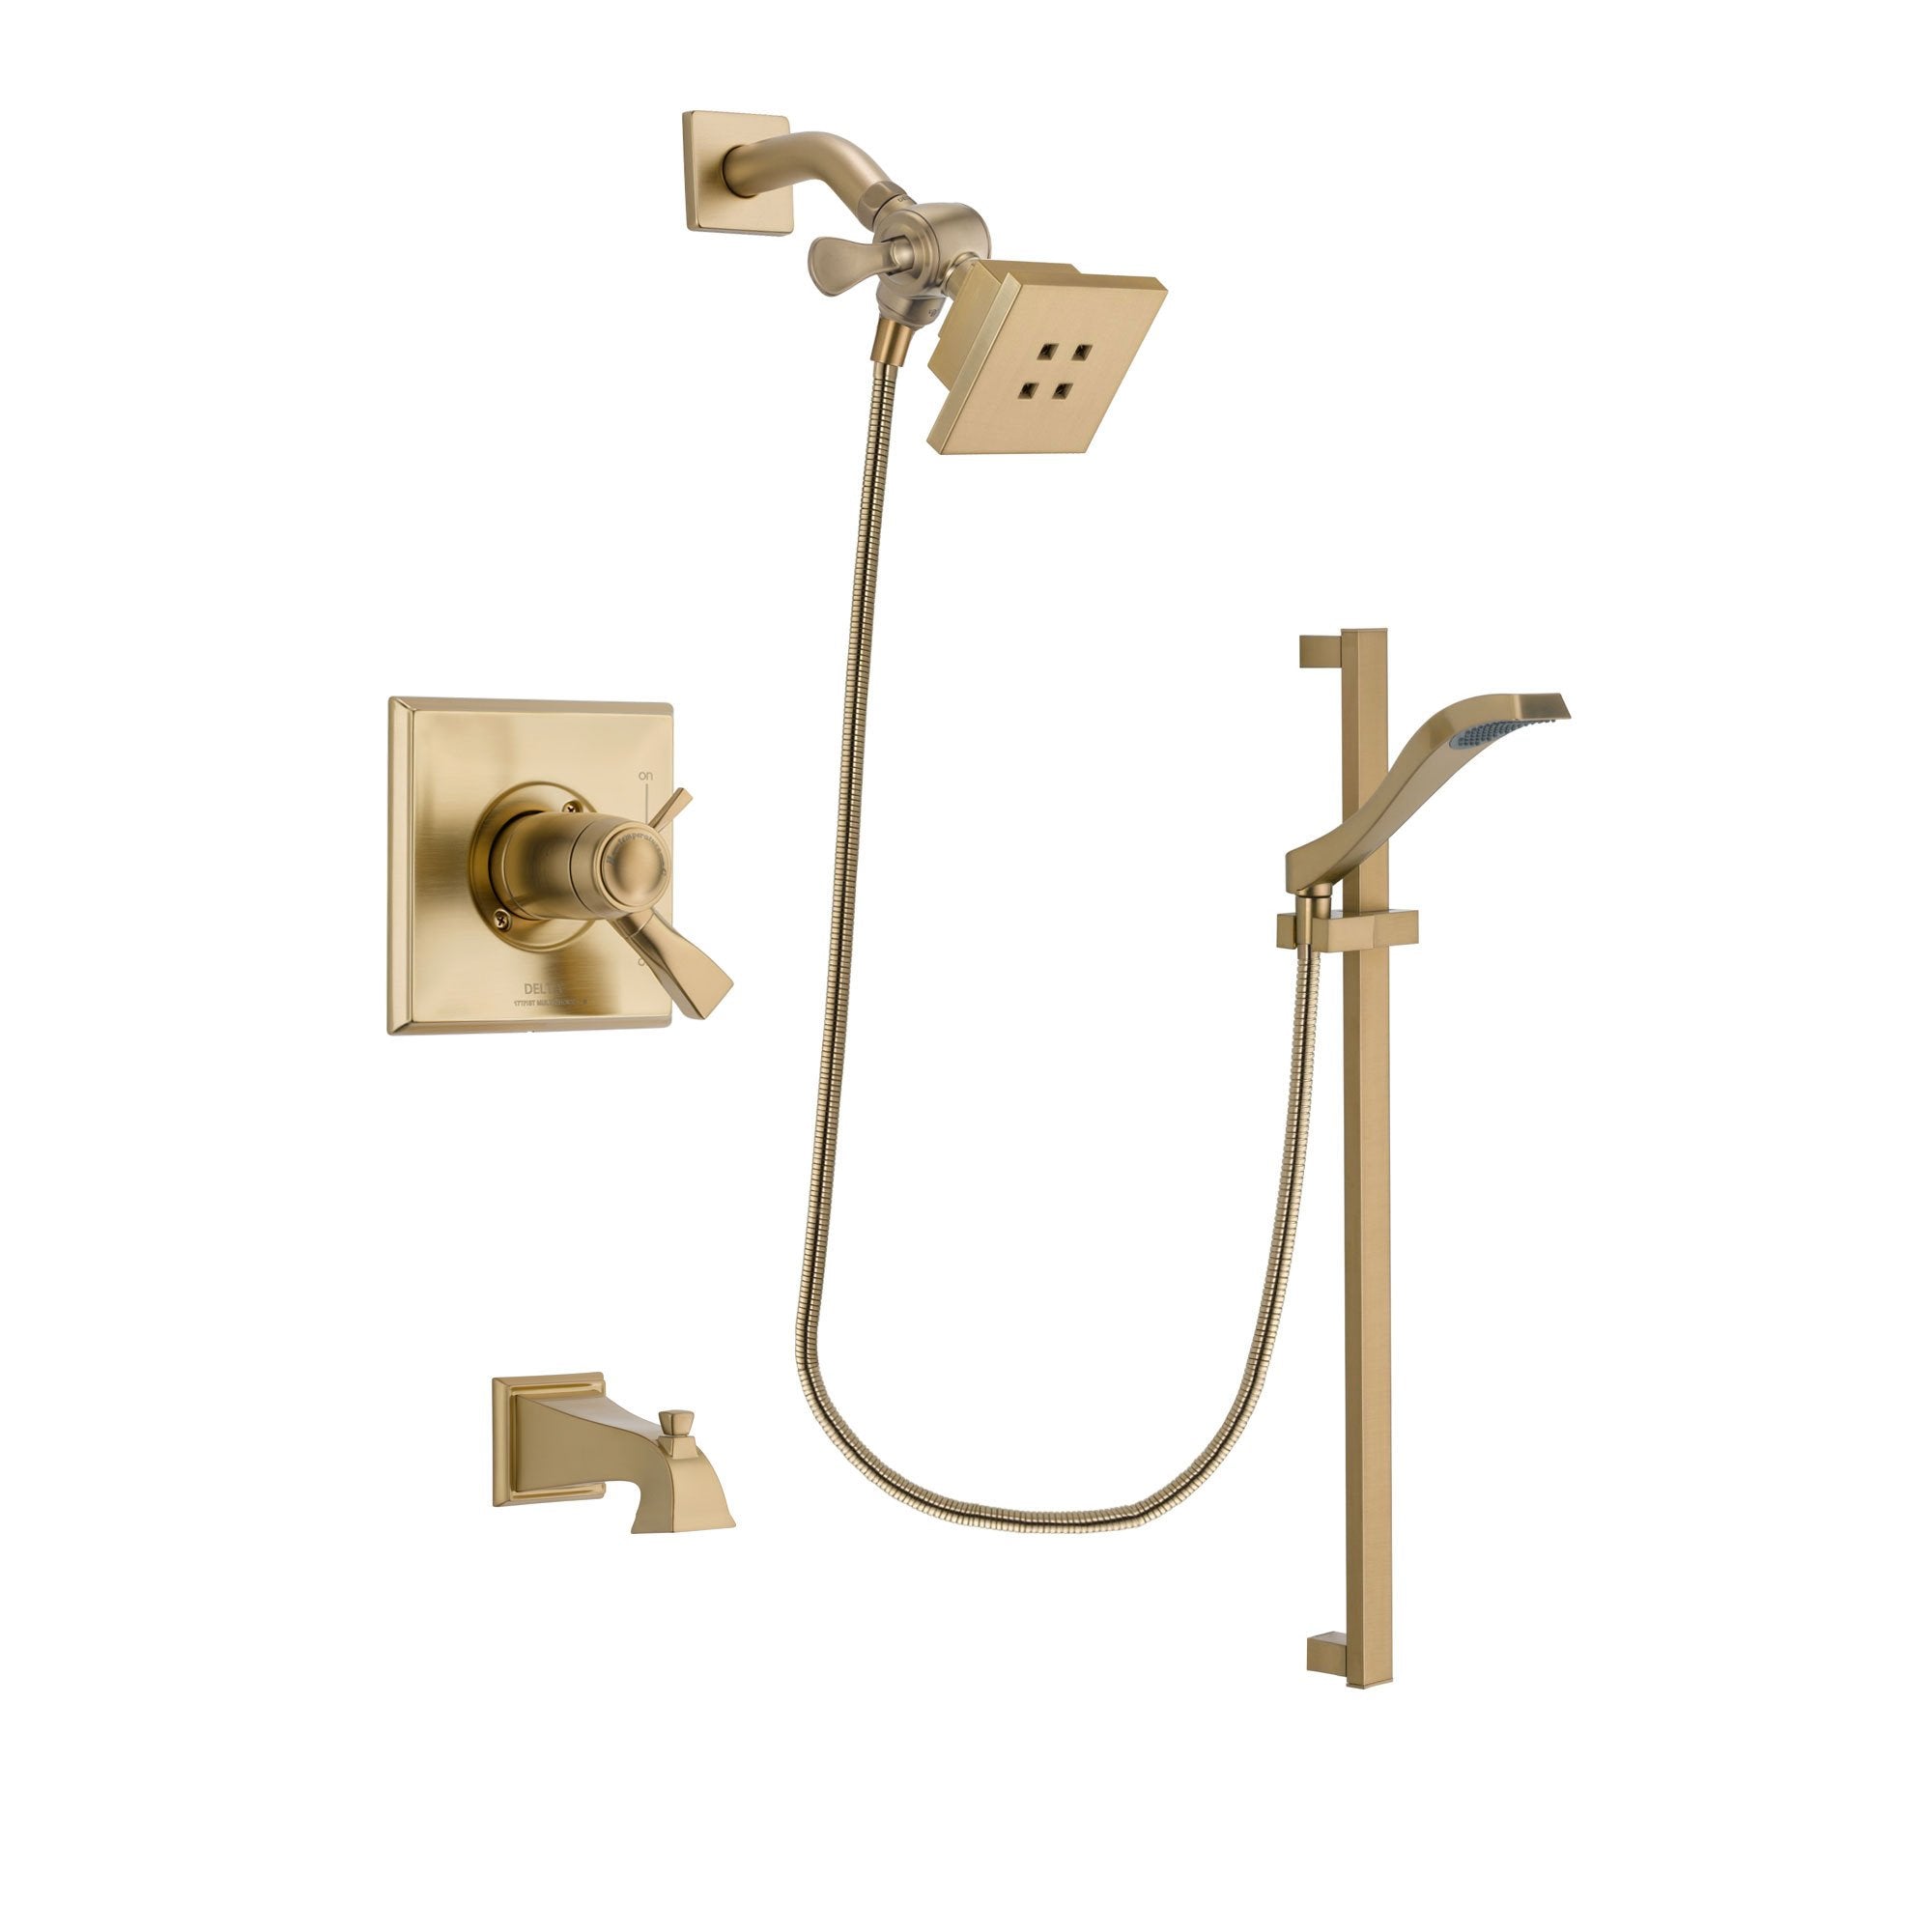 Delta Dryden Champagne Bronze Finish Thermostatic Tub and Shower Faucet System Package with Square Showerhead and Modern Handheld Shower Spray with Slide Bar Includes Rough-in Valve and Tub Spout DSP3909V